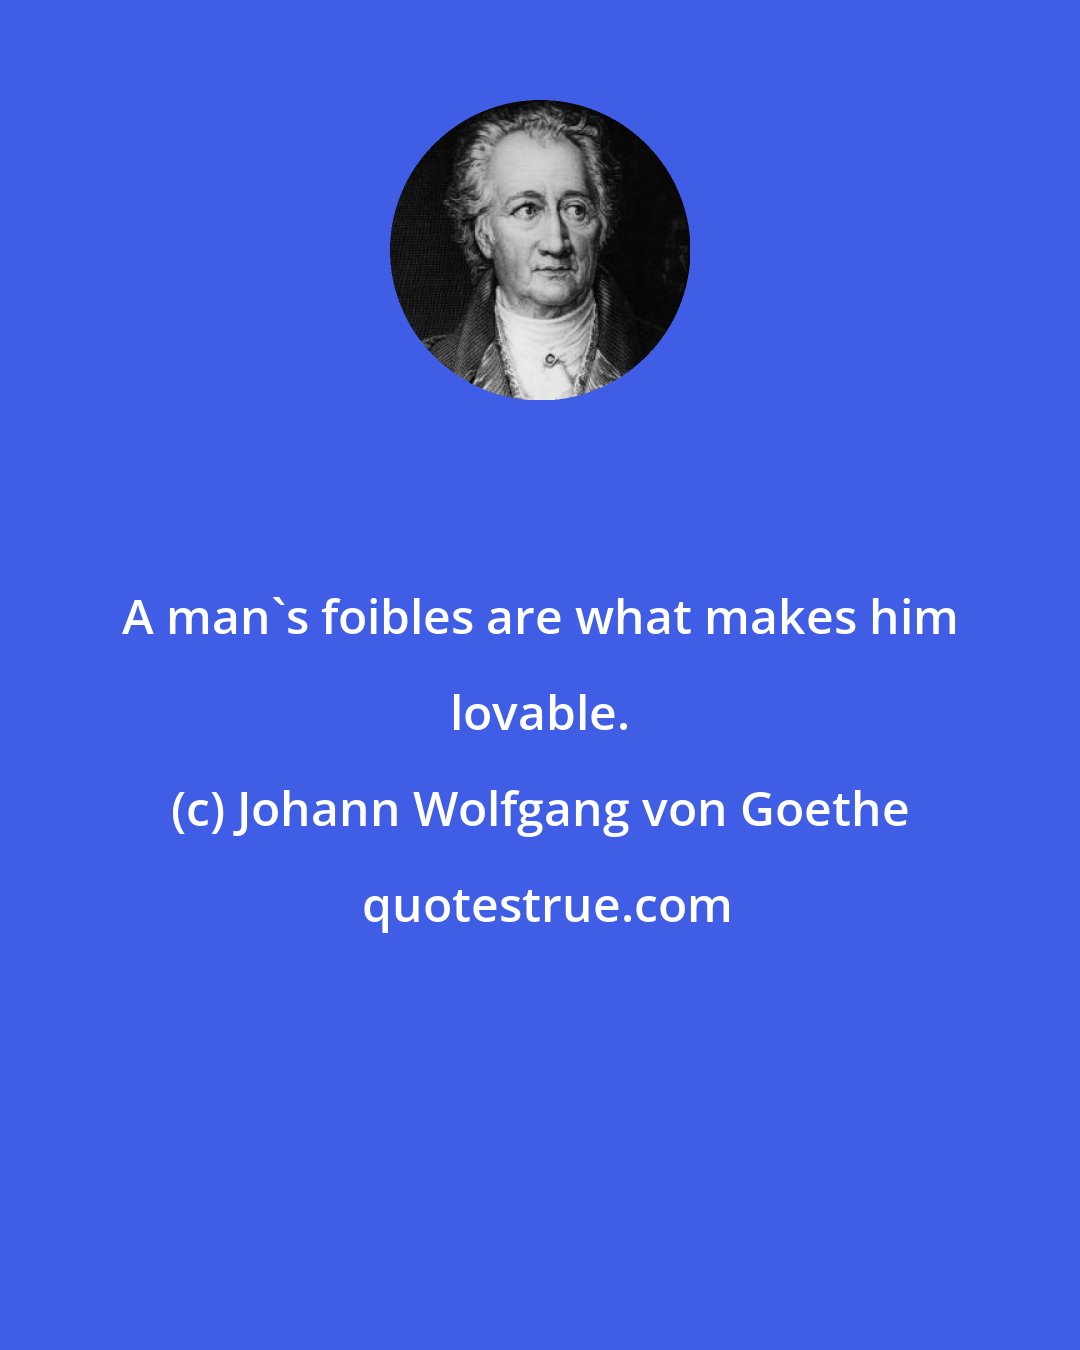 Johann Wolfgang von Goethe: A man's foibles are what makes him lovable.